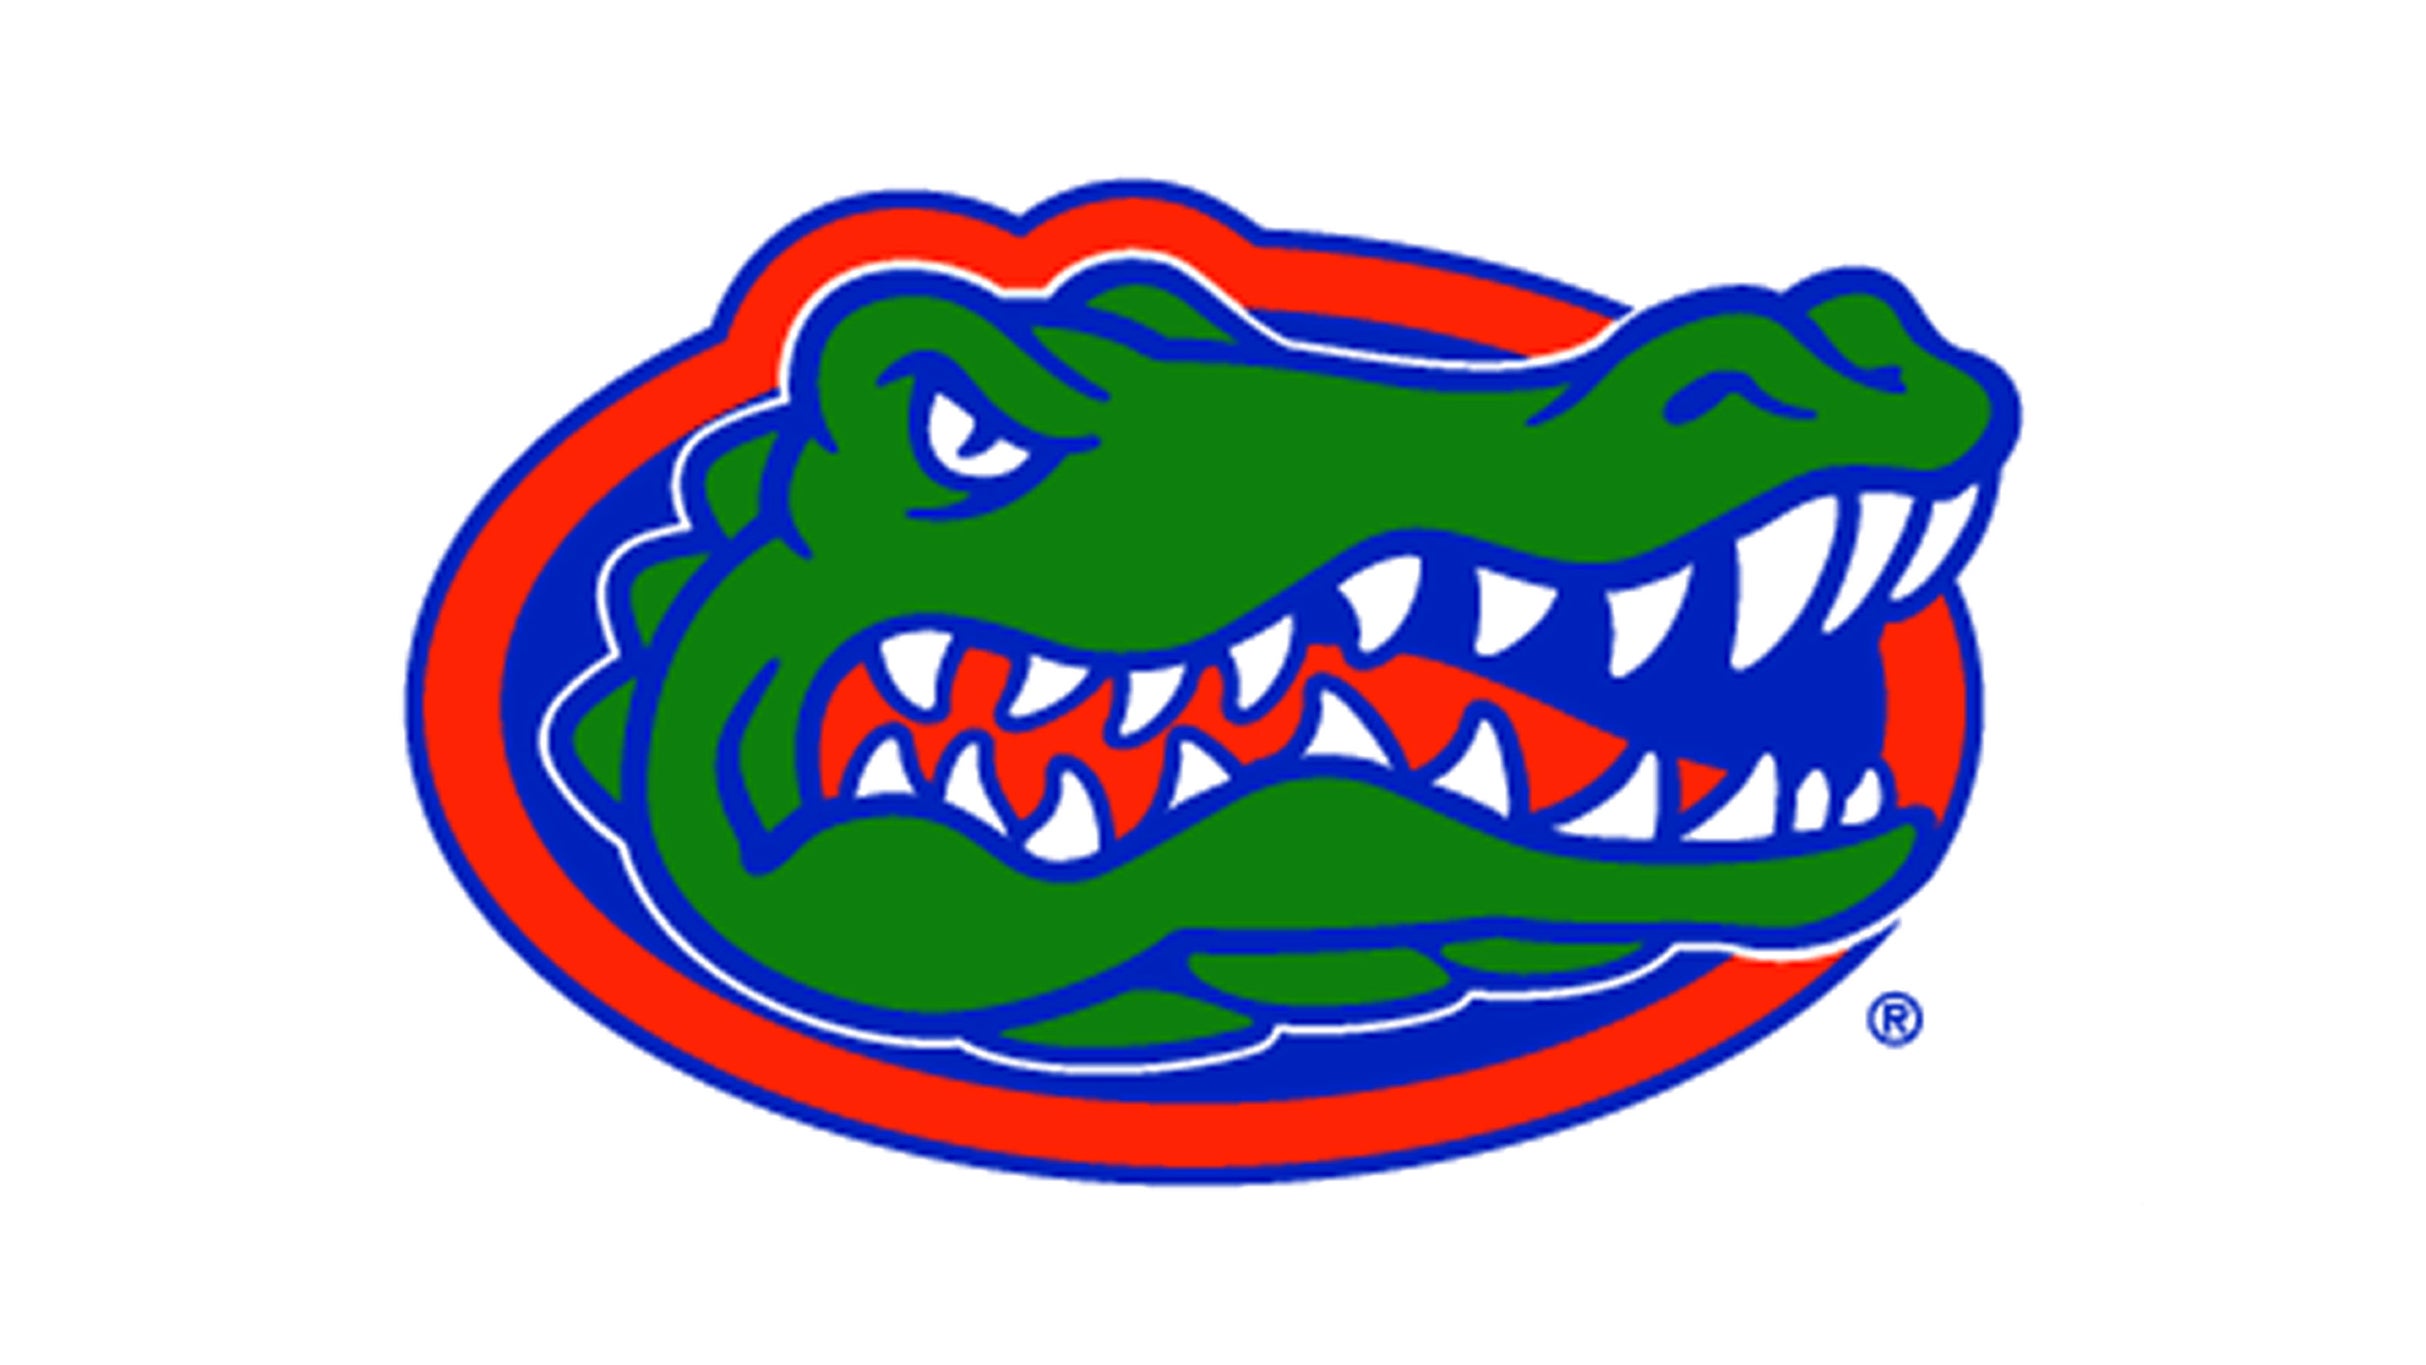 Florida Gators Football vs. Ole Miss Rebels Football in Gainesville promo photo for Official Platinum presale offer code